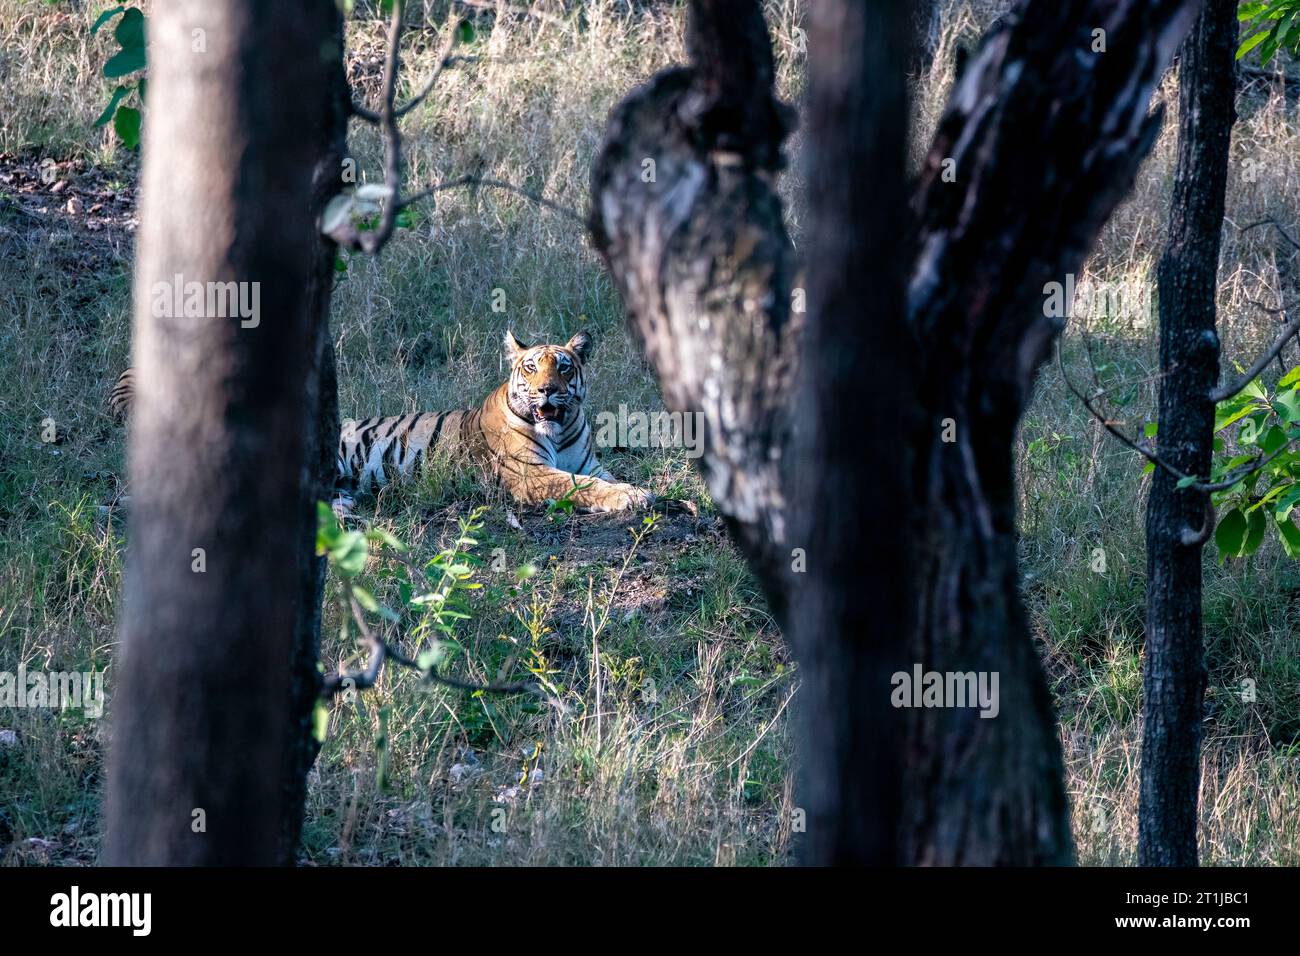 A dominant tigress relaxing in thick grasses on hot summer afternoon inside the jungles of Pench National Park during a wildlife safari Stock Photo